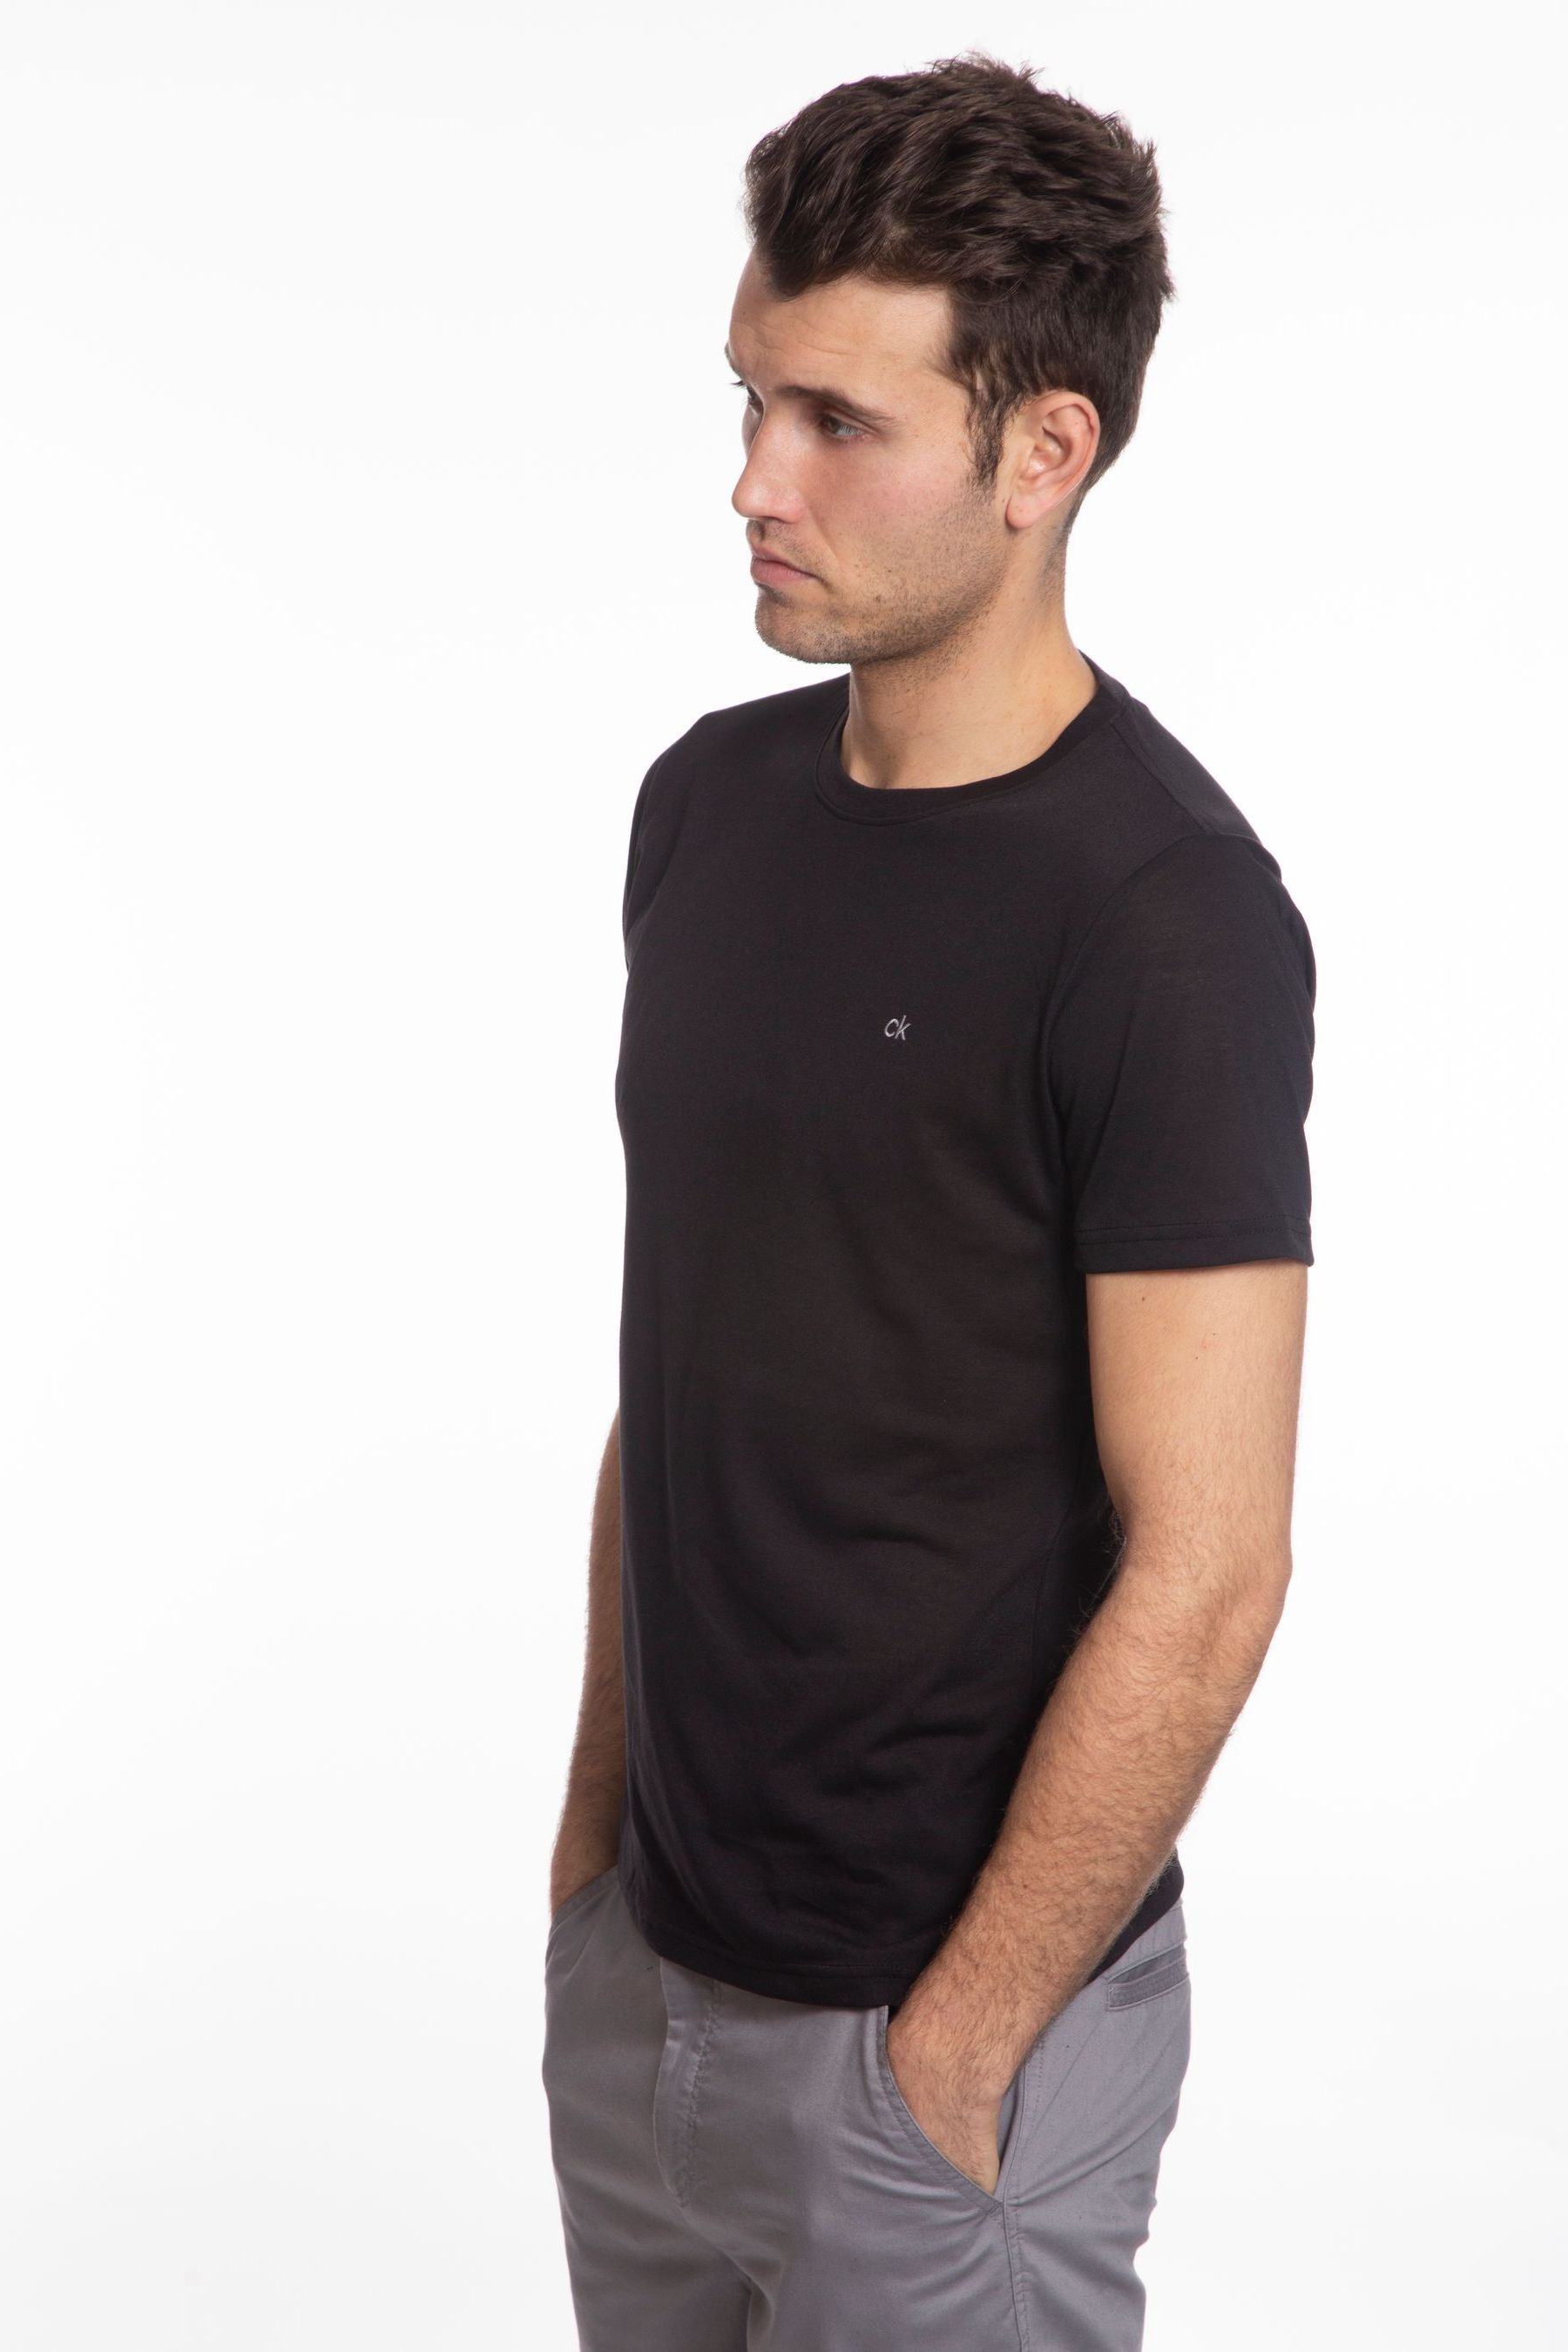 Buy Calvin Klein Golf White T-Shirts 3 Pack from the Next UK online shop